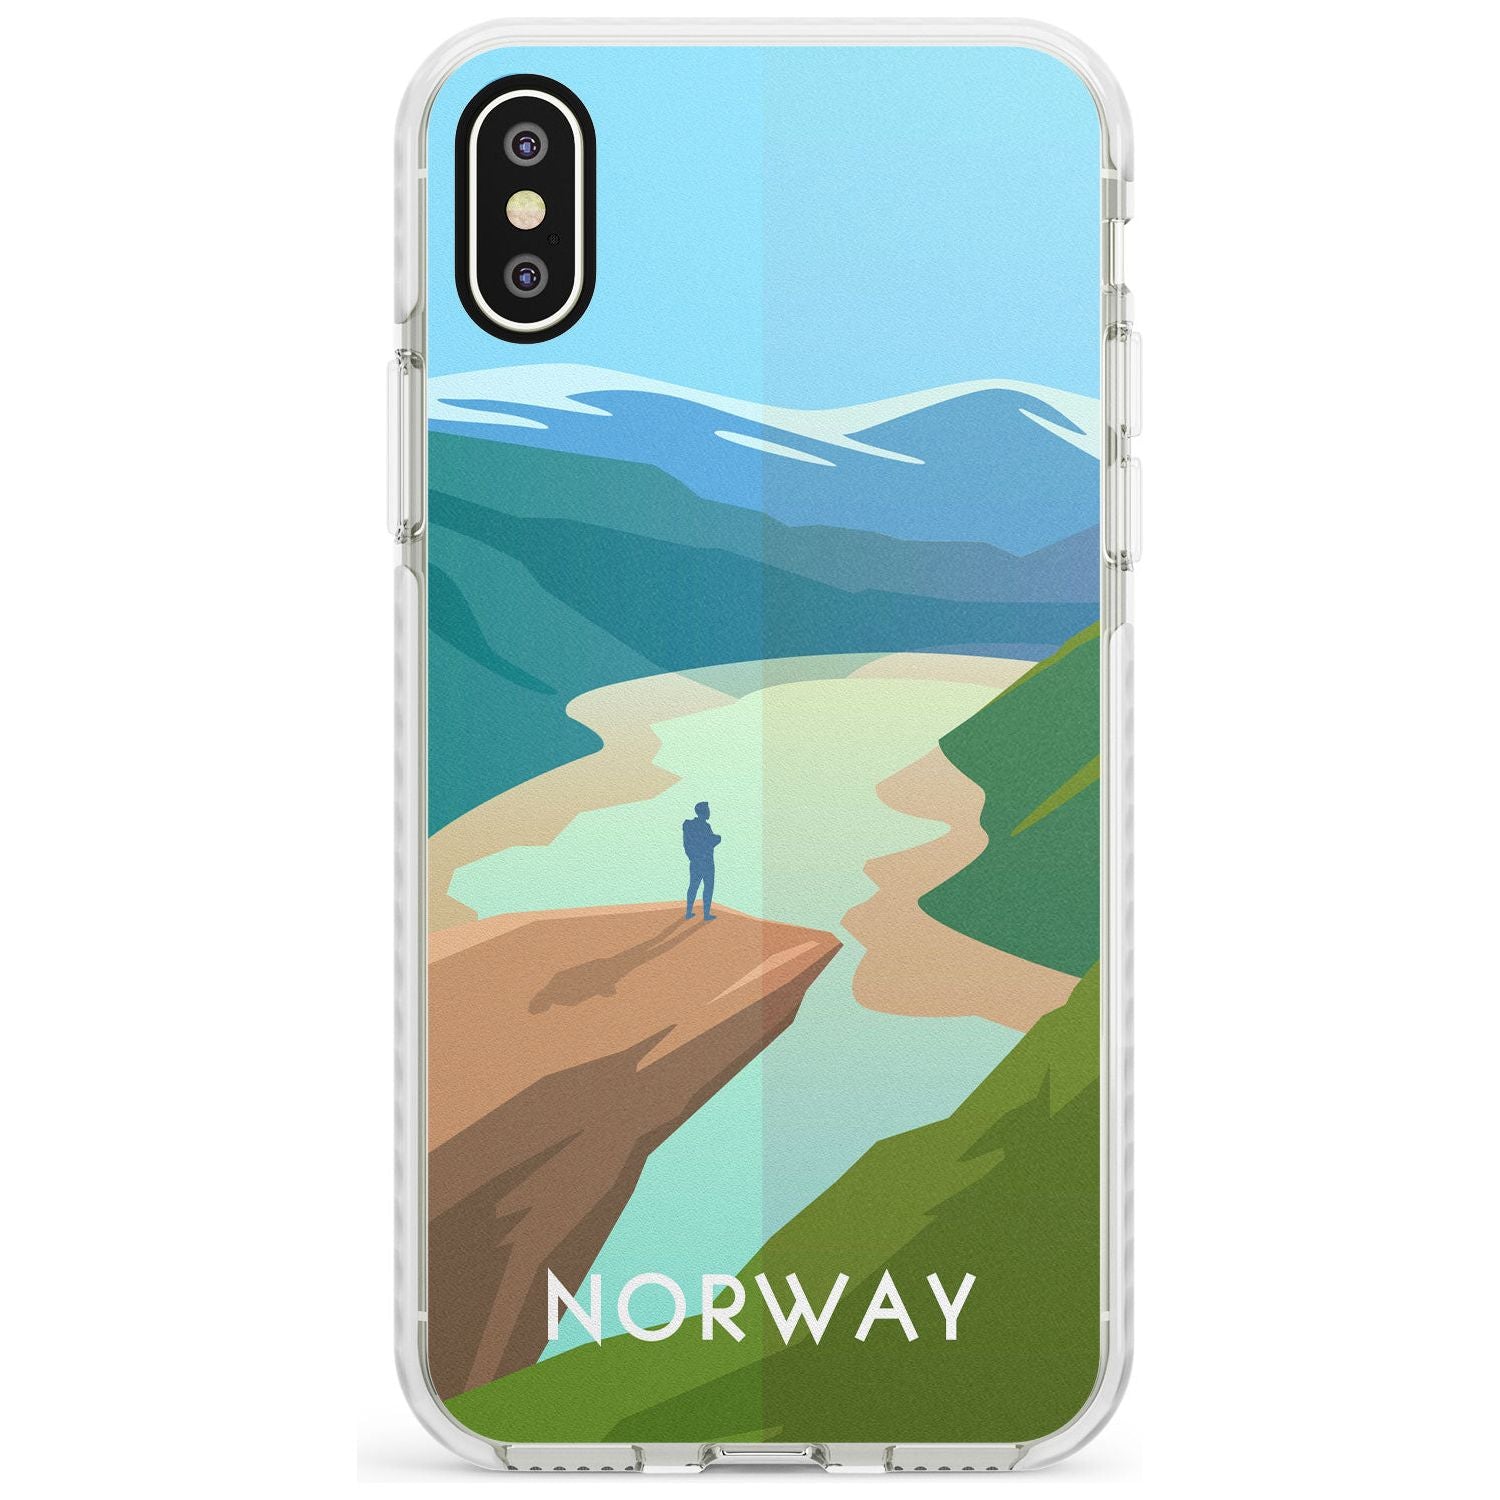 Vintage Travel Poster Norway Impact Phone Case for iPhone X XS Max XR